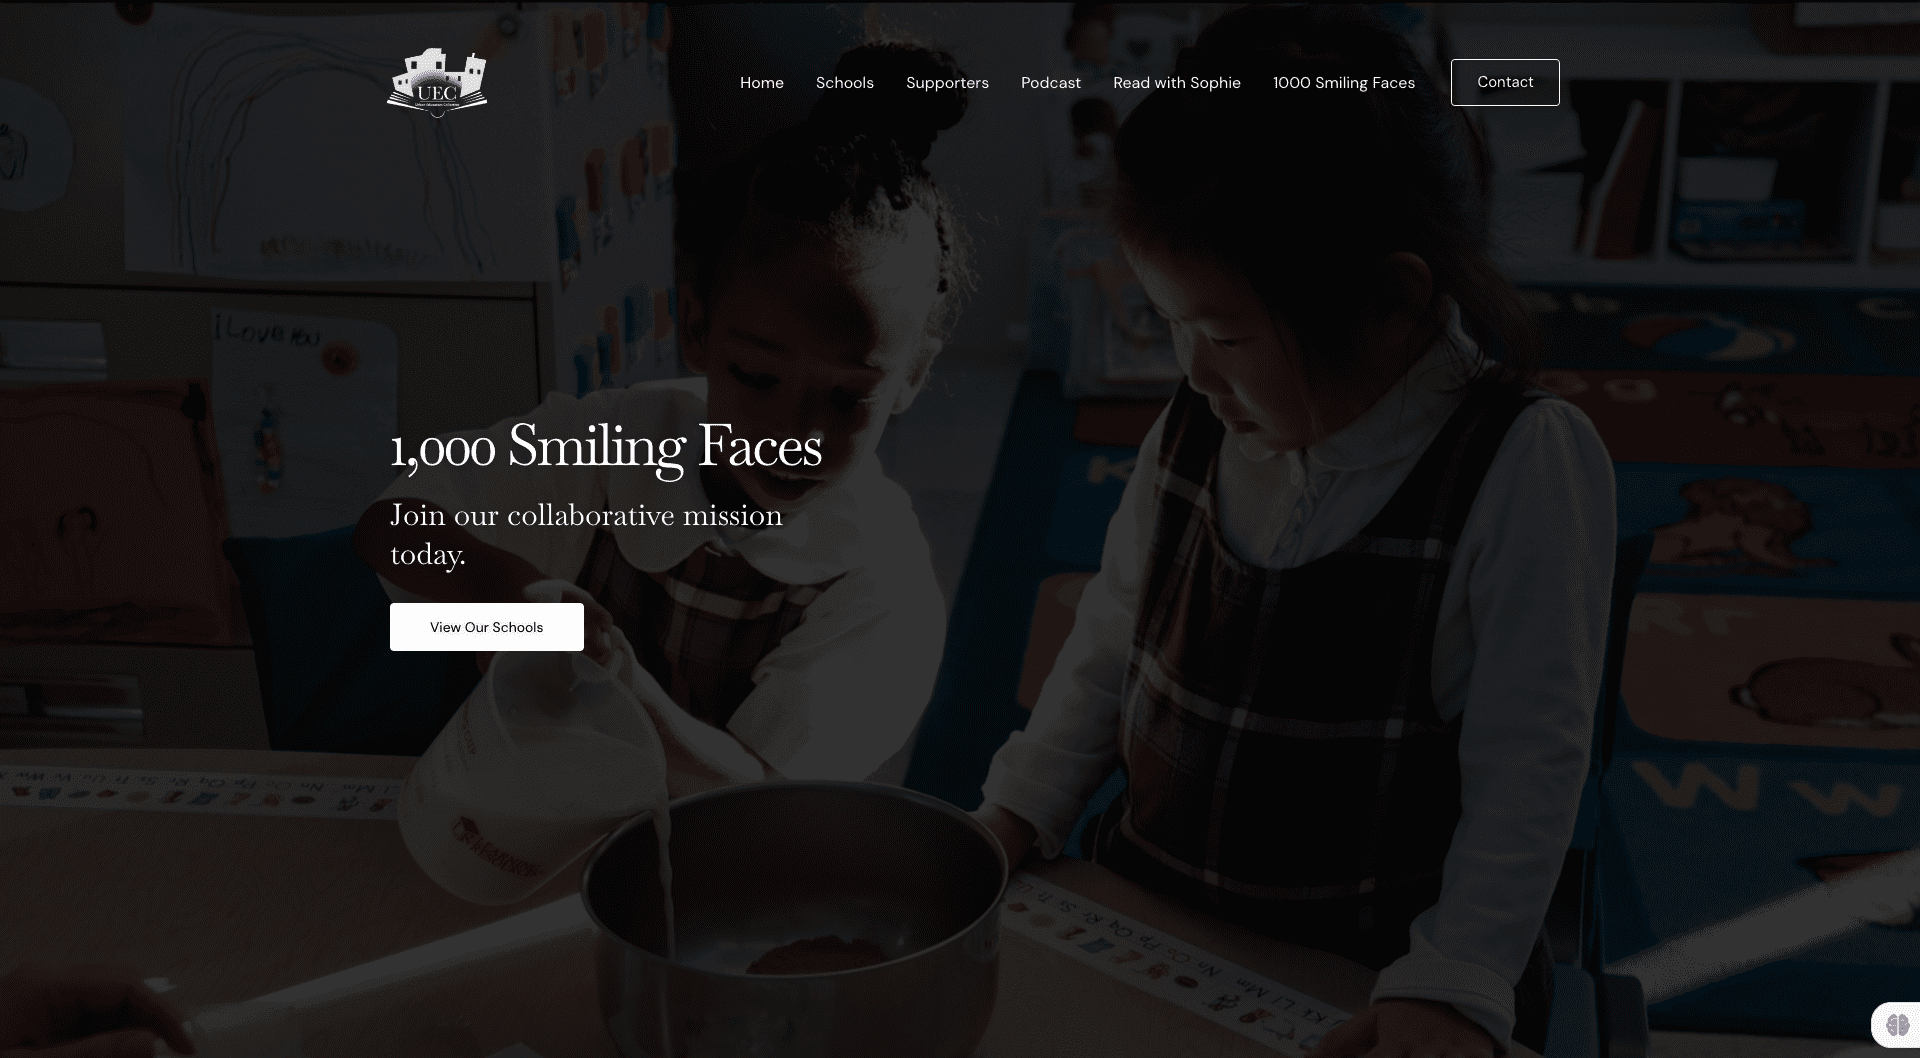 An urban website design for a children's school, created by a collective of educators.